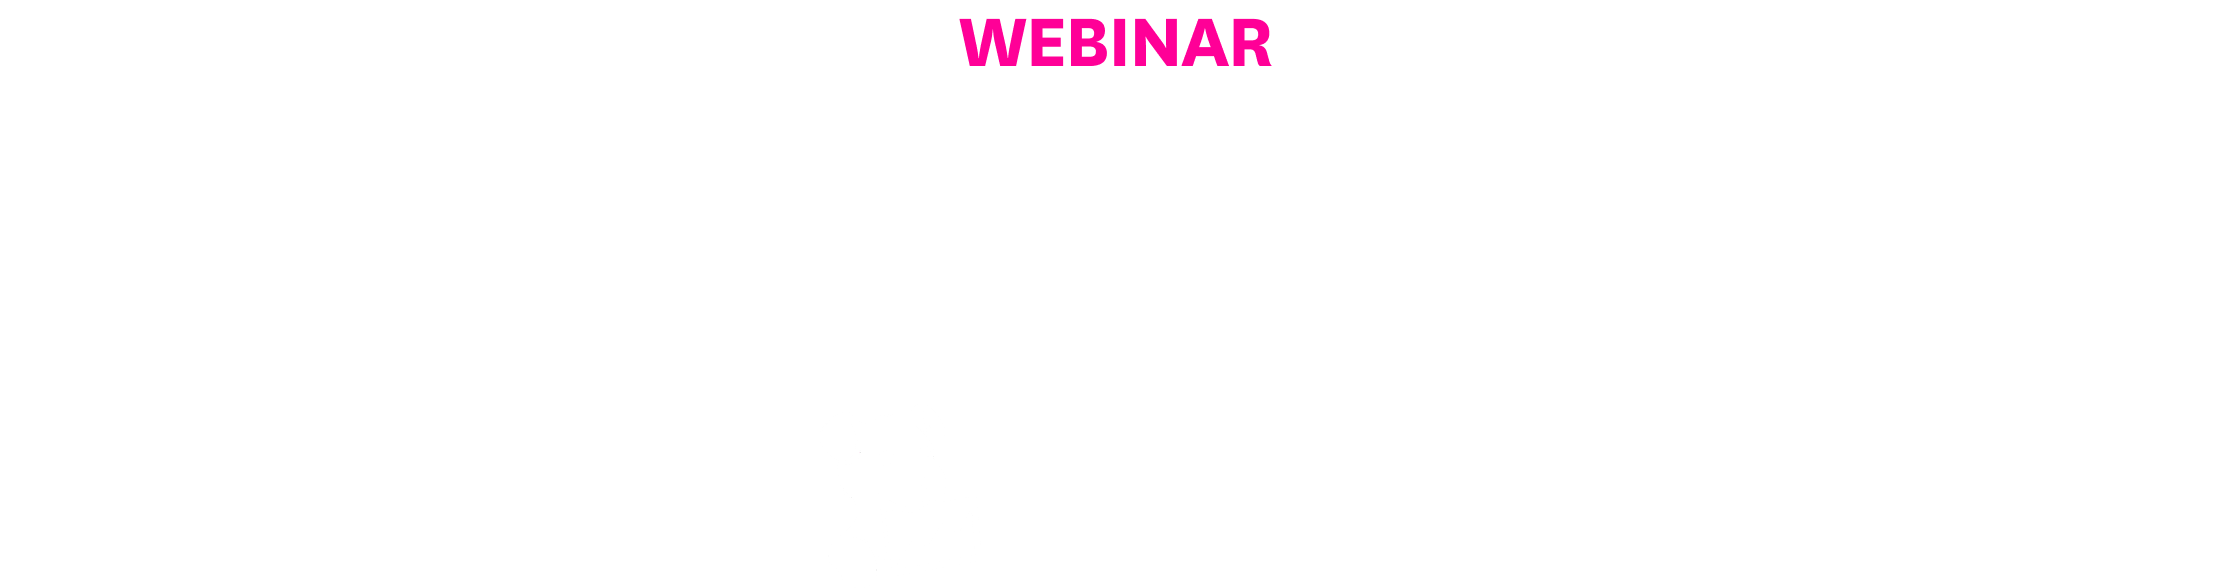 How ADP Reduced IT Costs by 30% with the Datadog observability platform header image